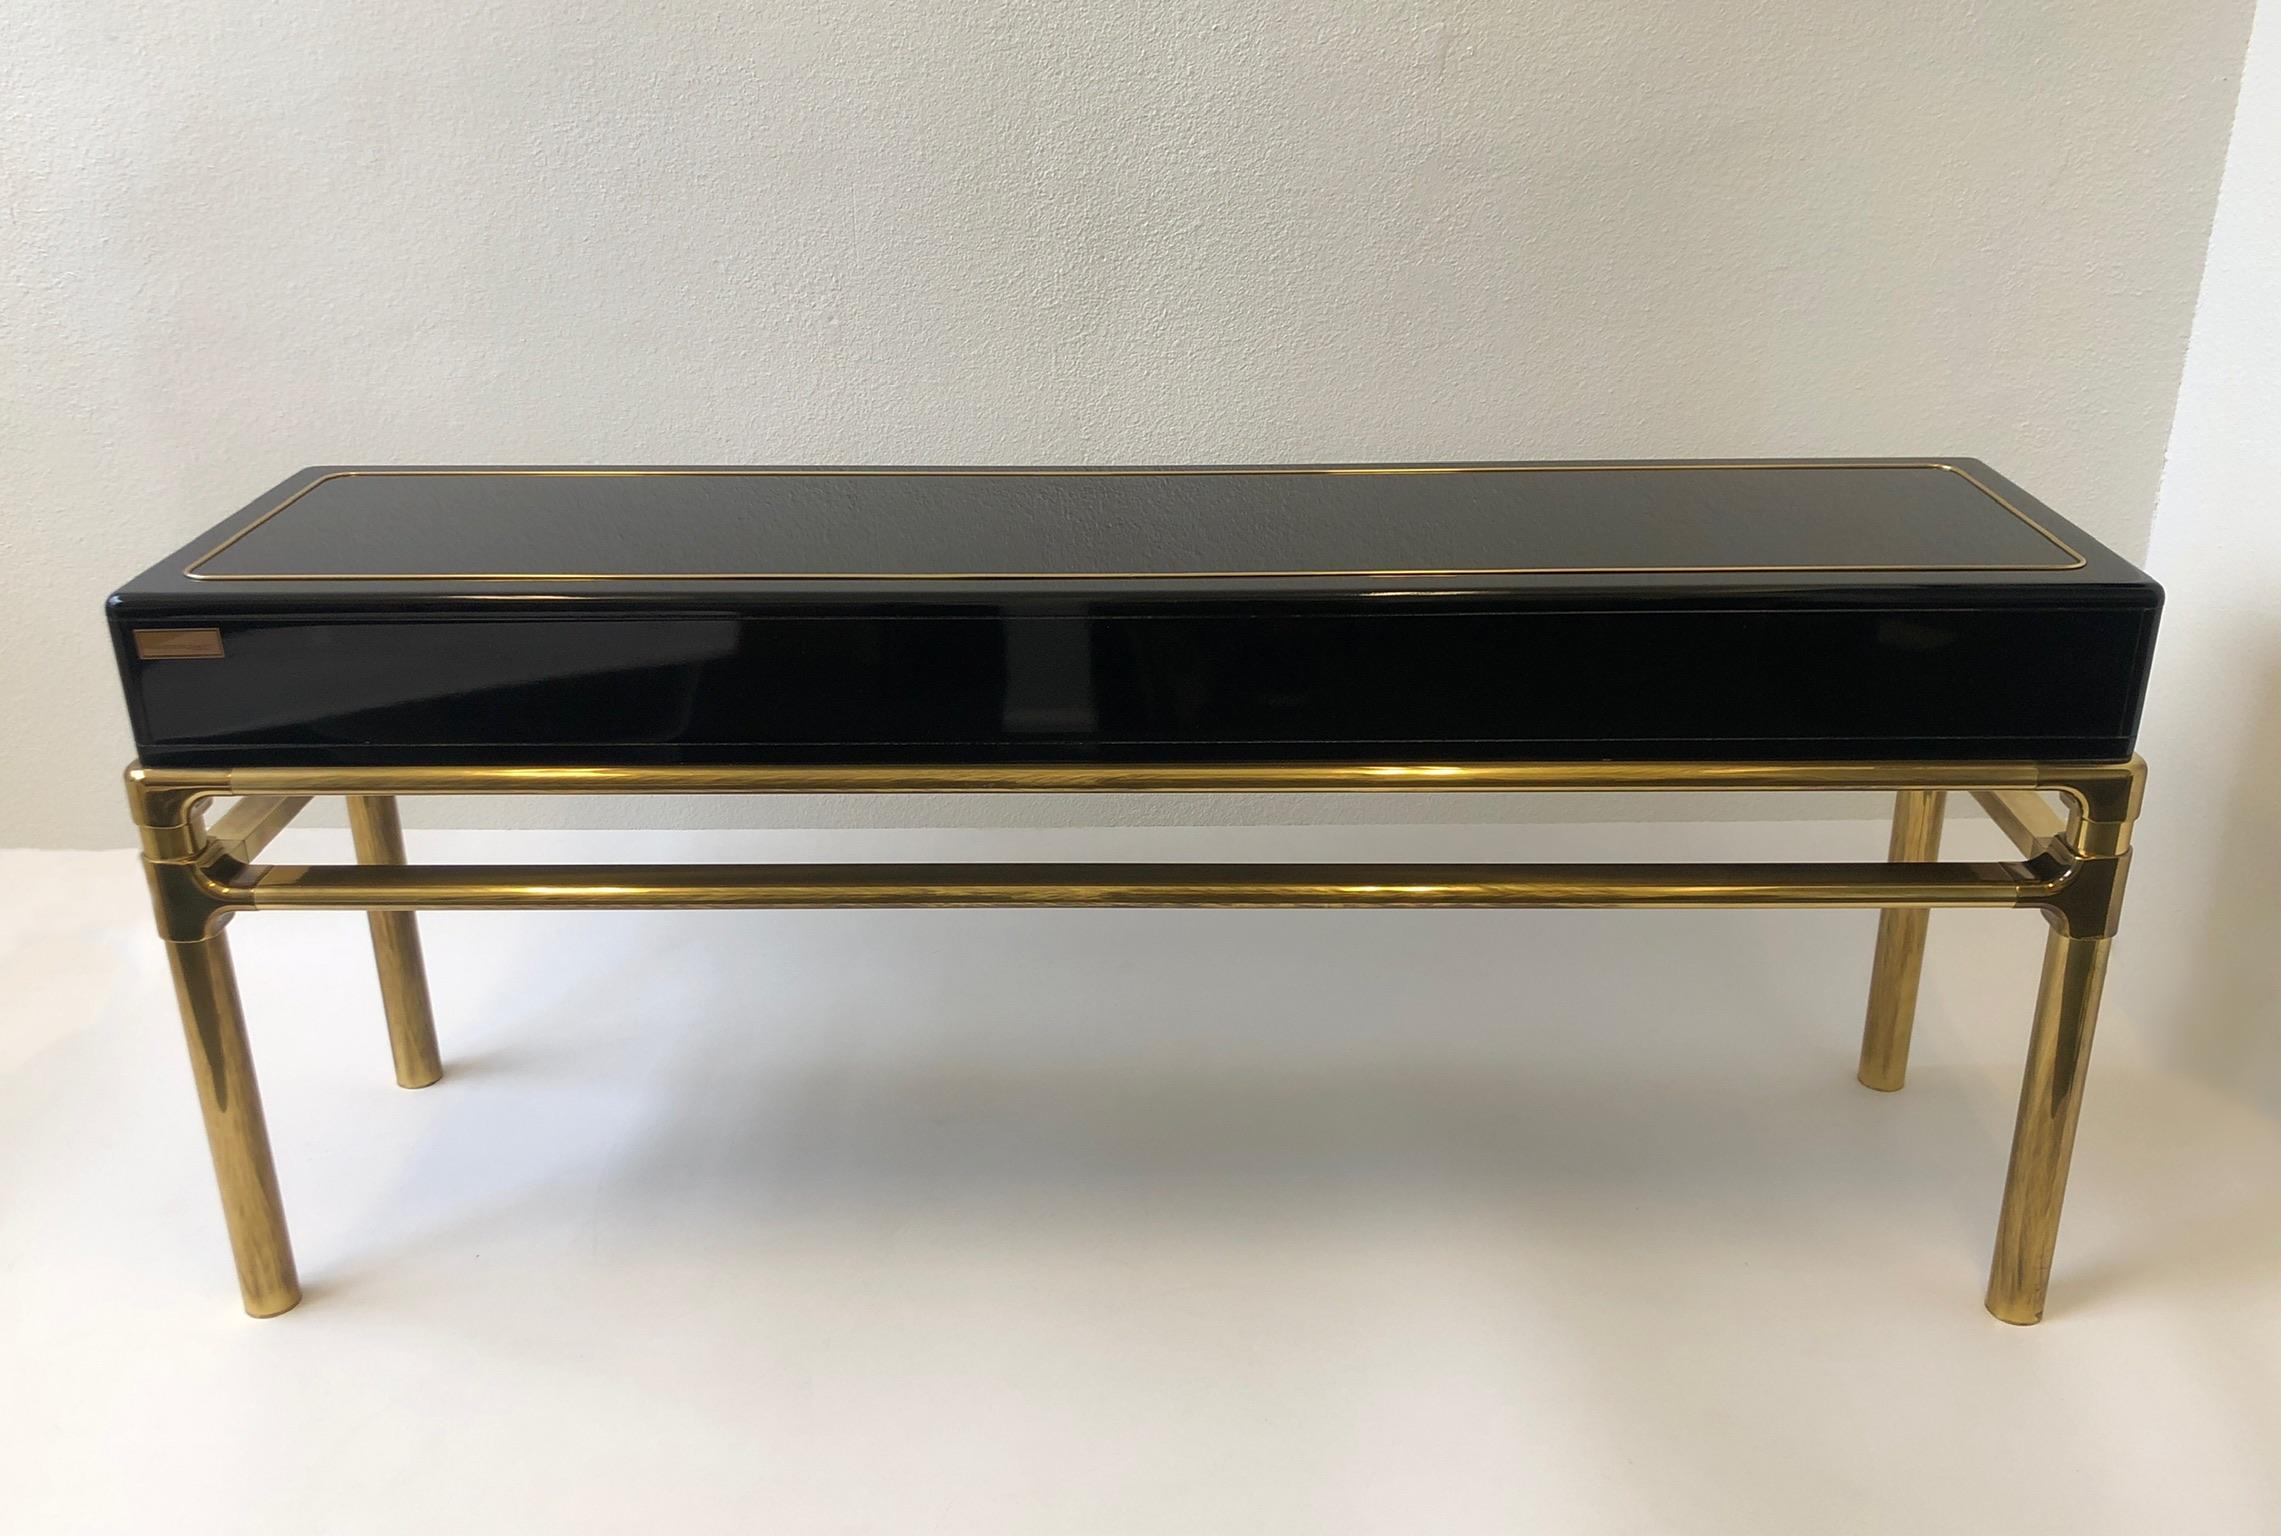 American Brass and Black Lacquer Console Table with Drawers by Mastercraft